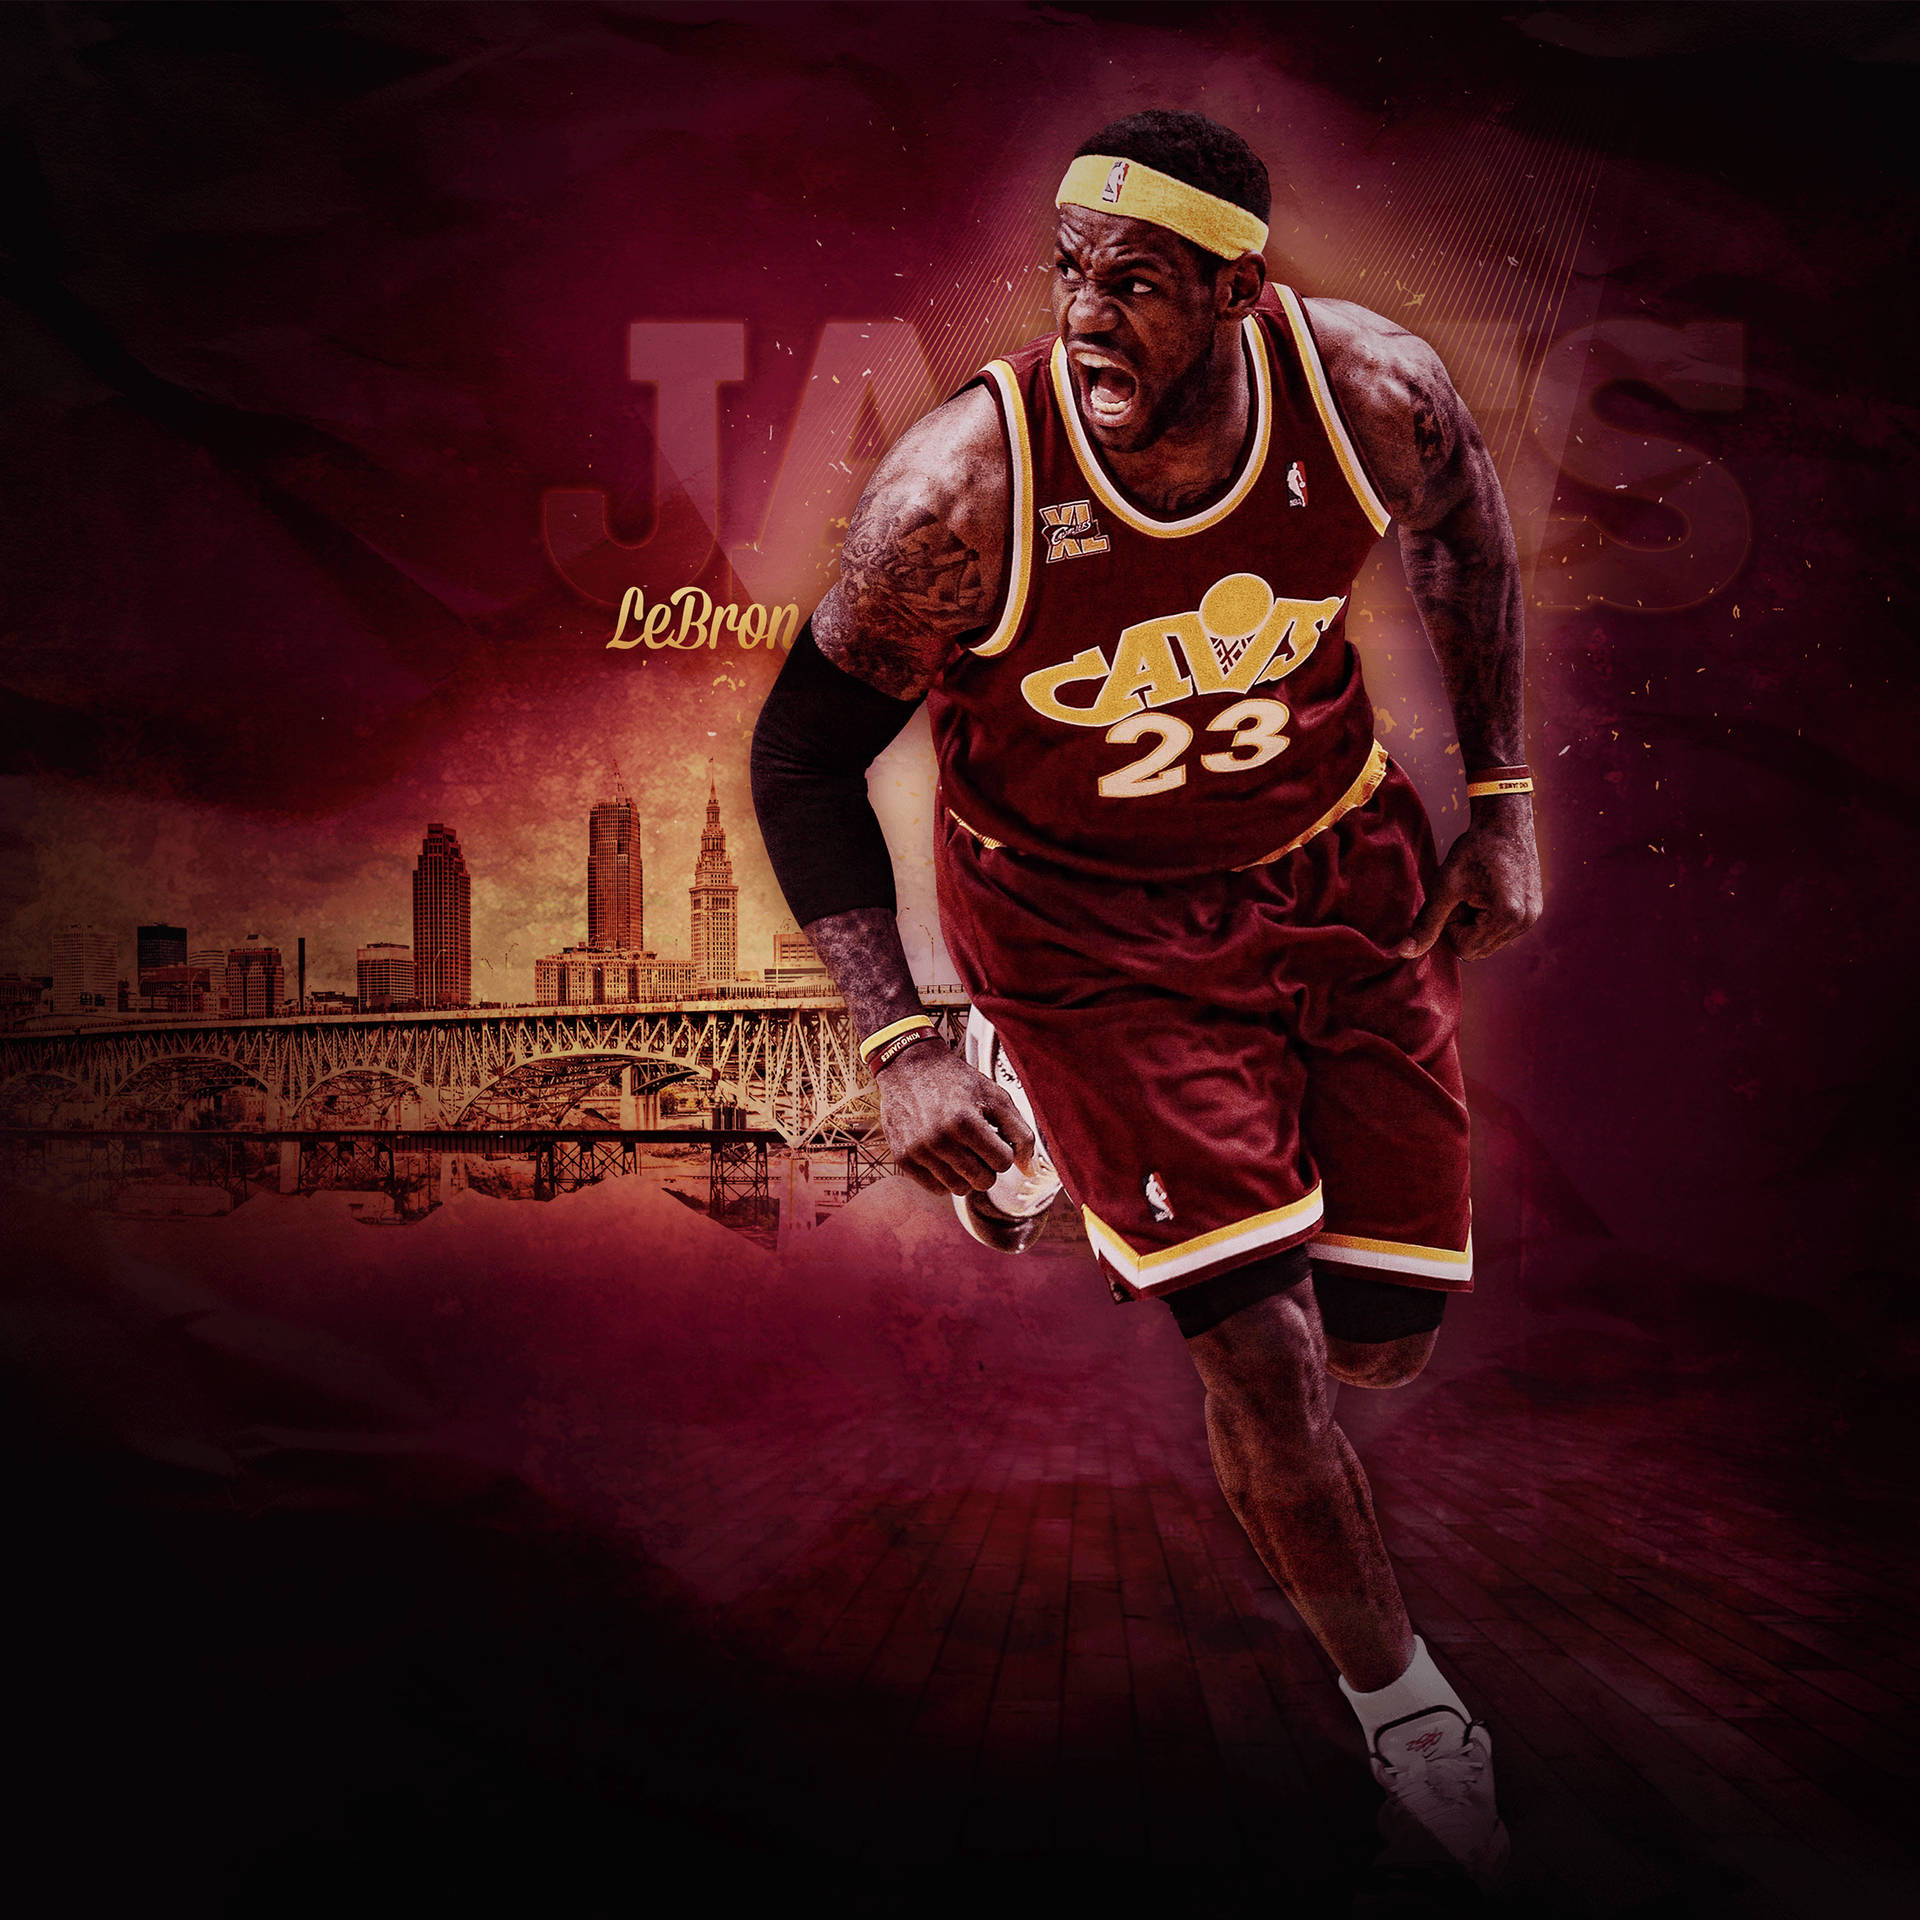 Cool Nba Player Lebron James Poster Background